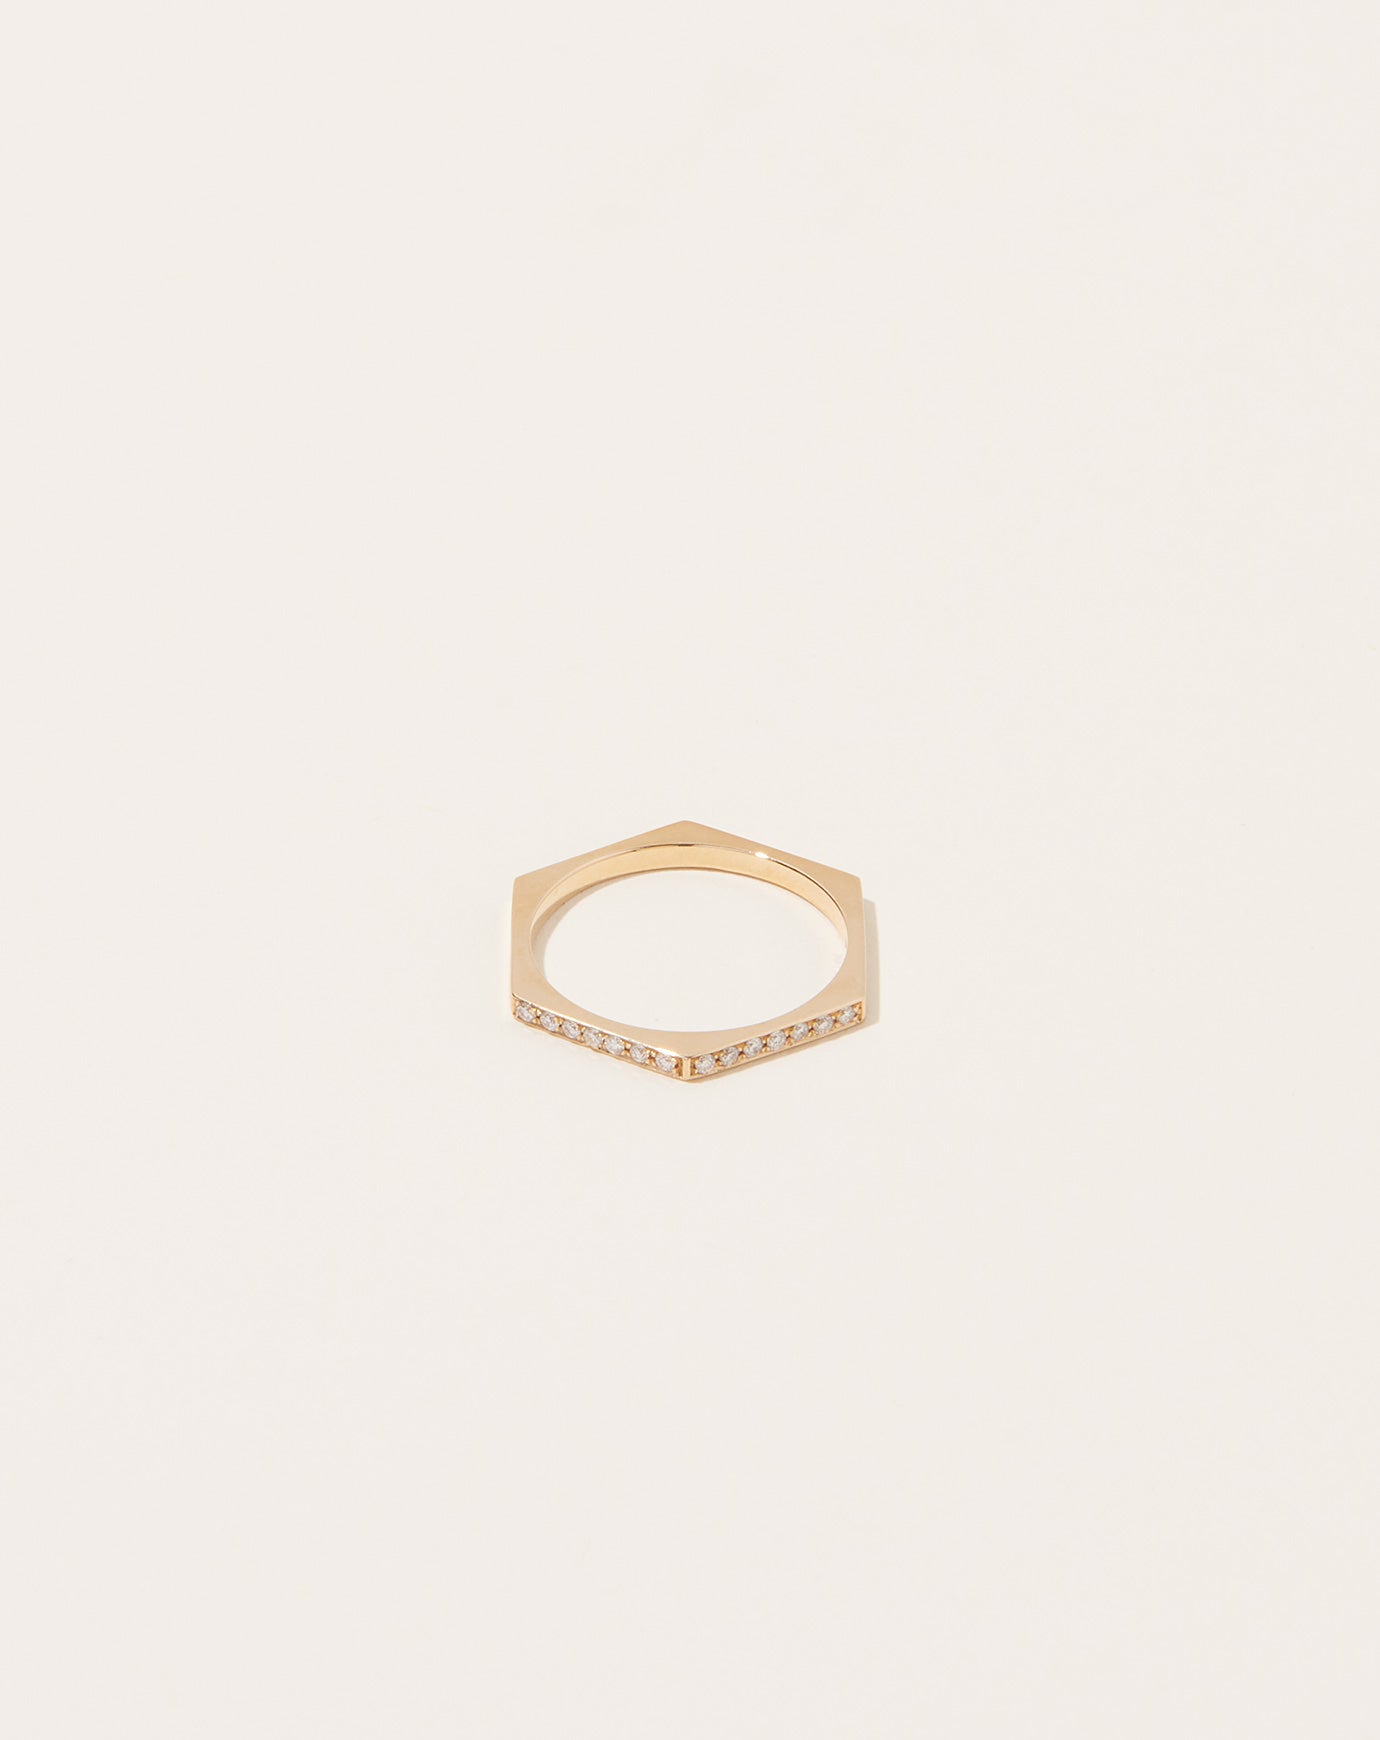 Selin Kent Hex Ring with White Diamonds in 14k Yellow Gold